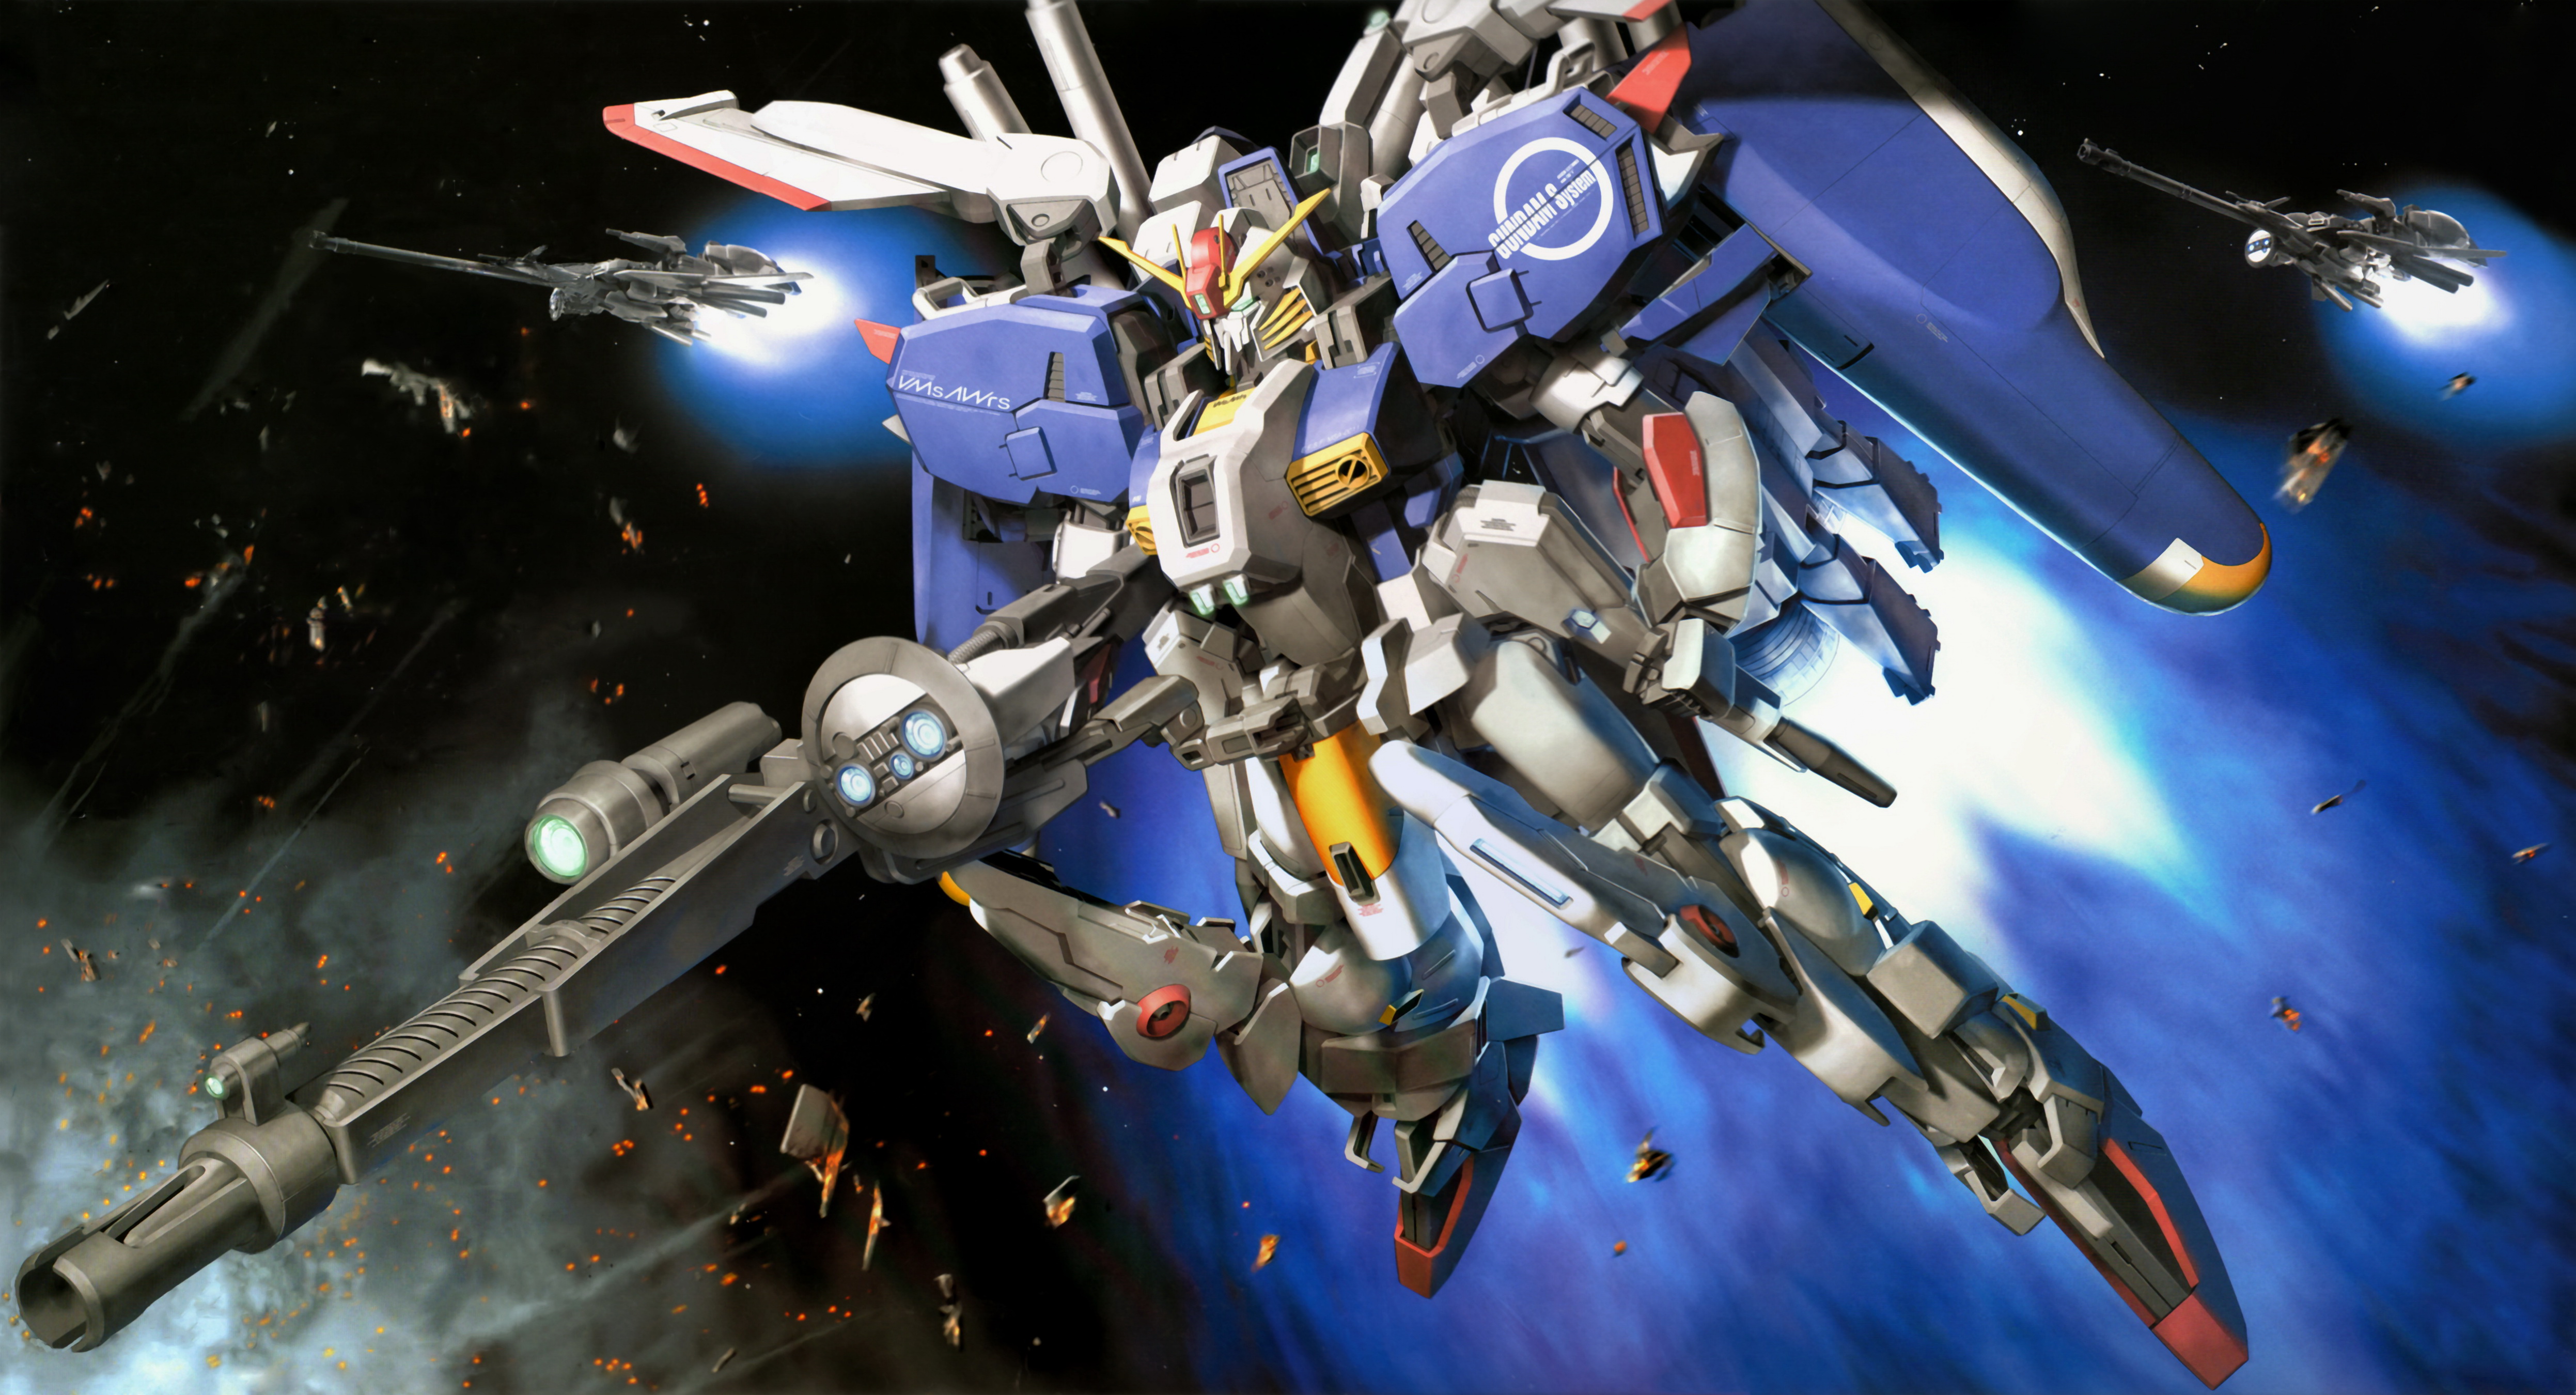 Download this Alpha Coders Wallpaper Abyss Anime Gundam picture